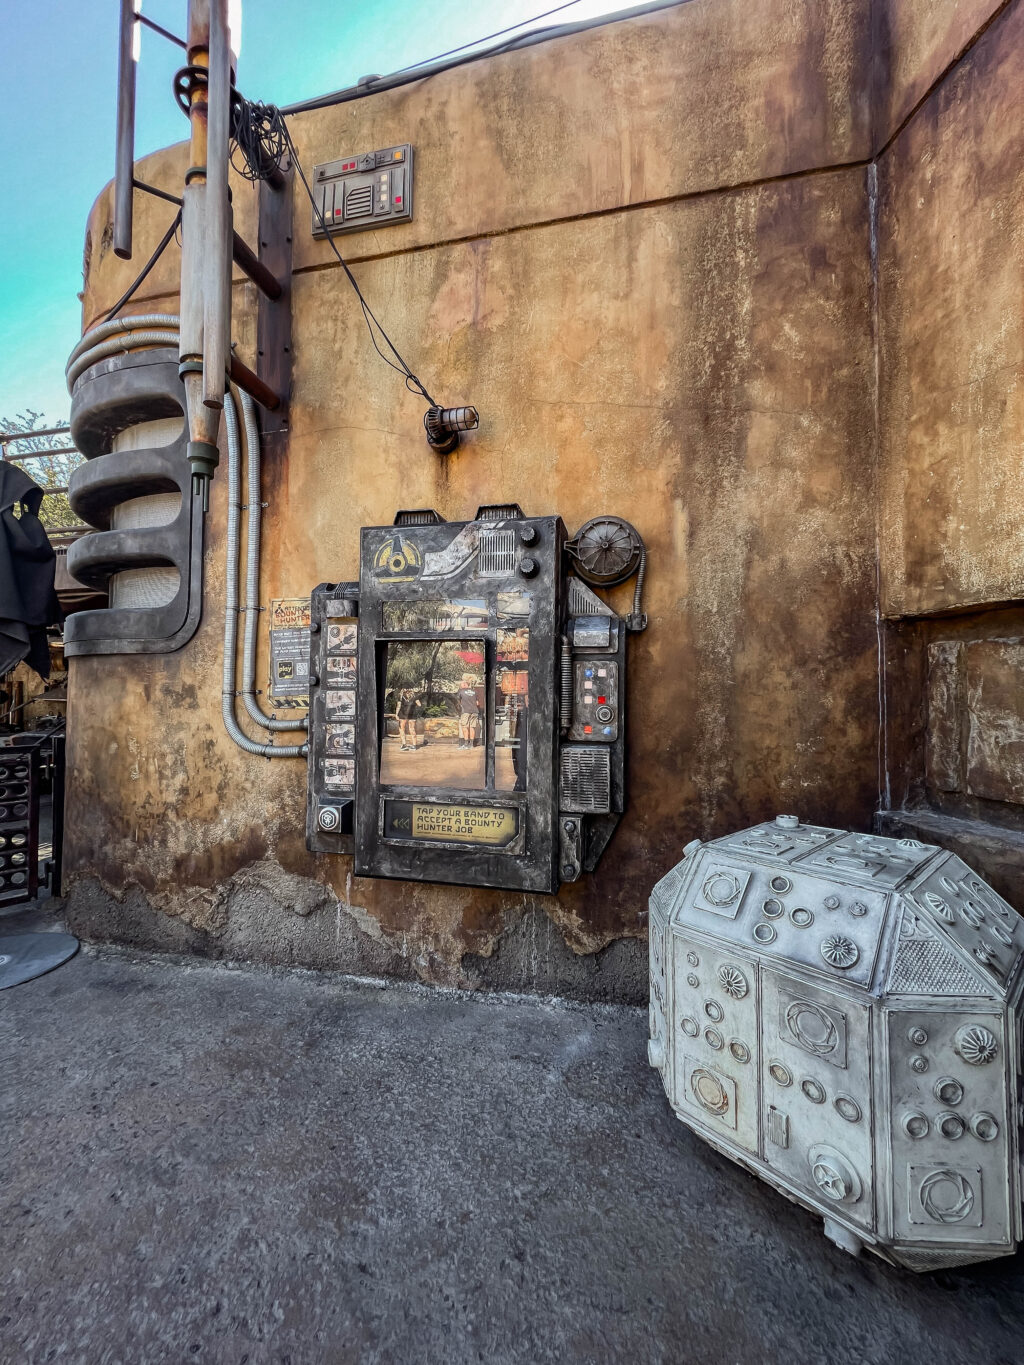 disneyland magic bands and bounty hunting in galaxy's edge: how it works and what you need to know